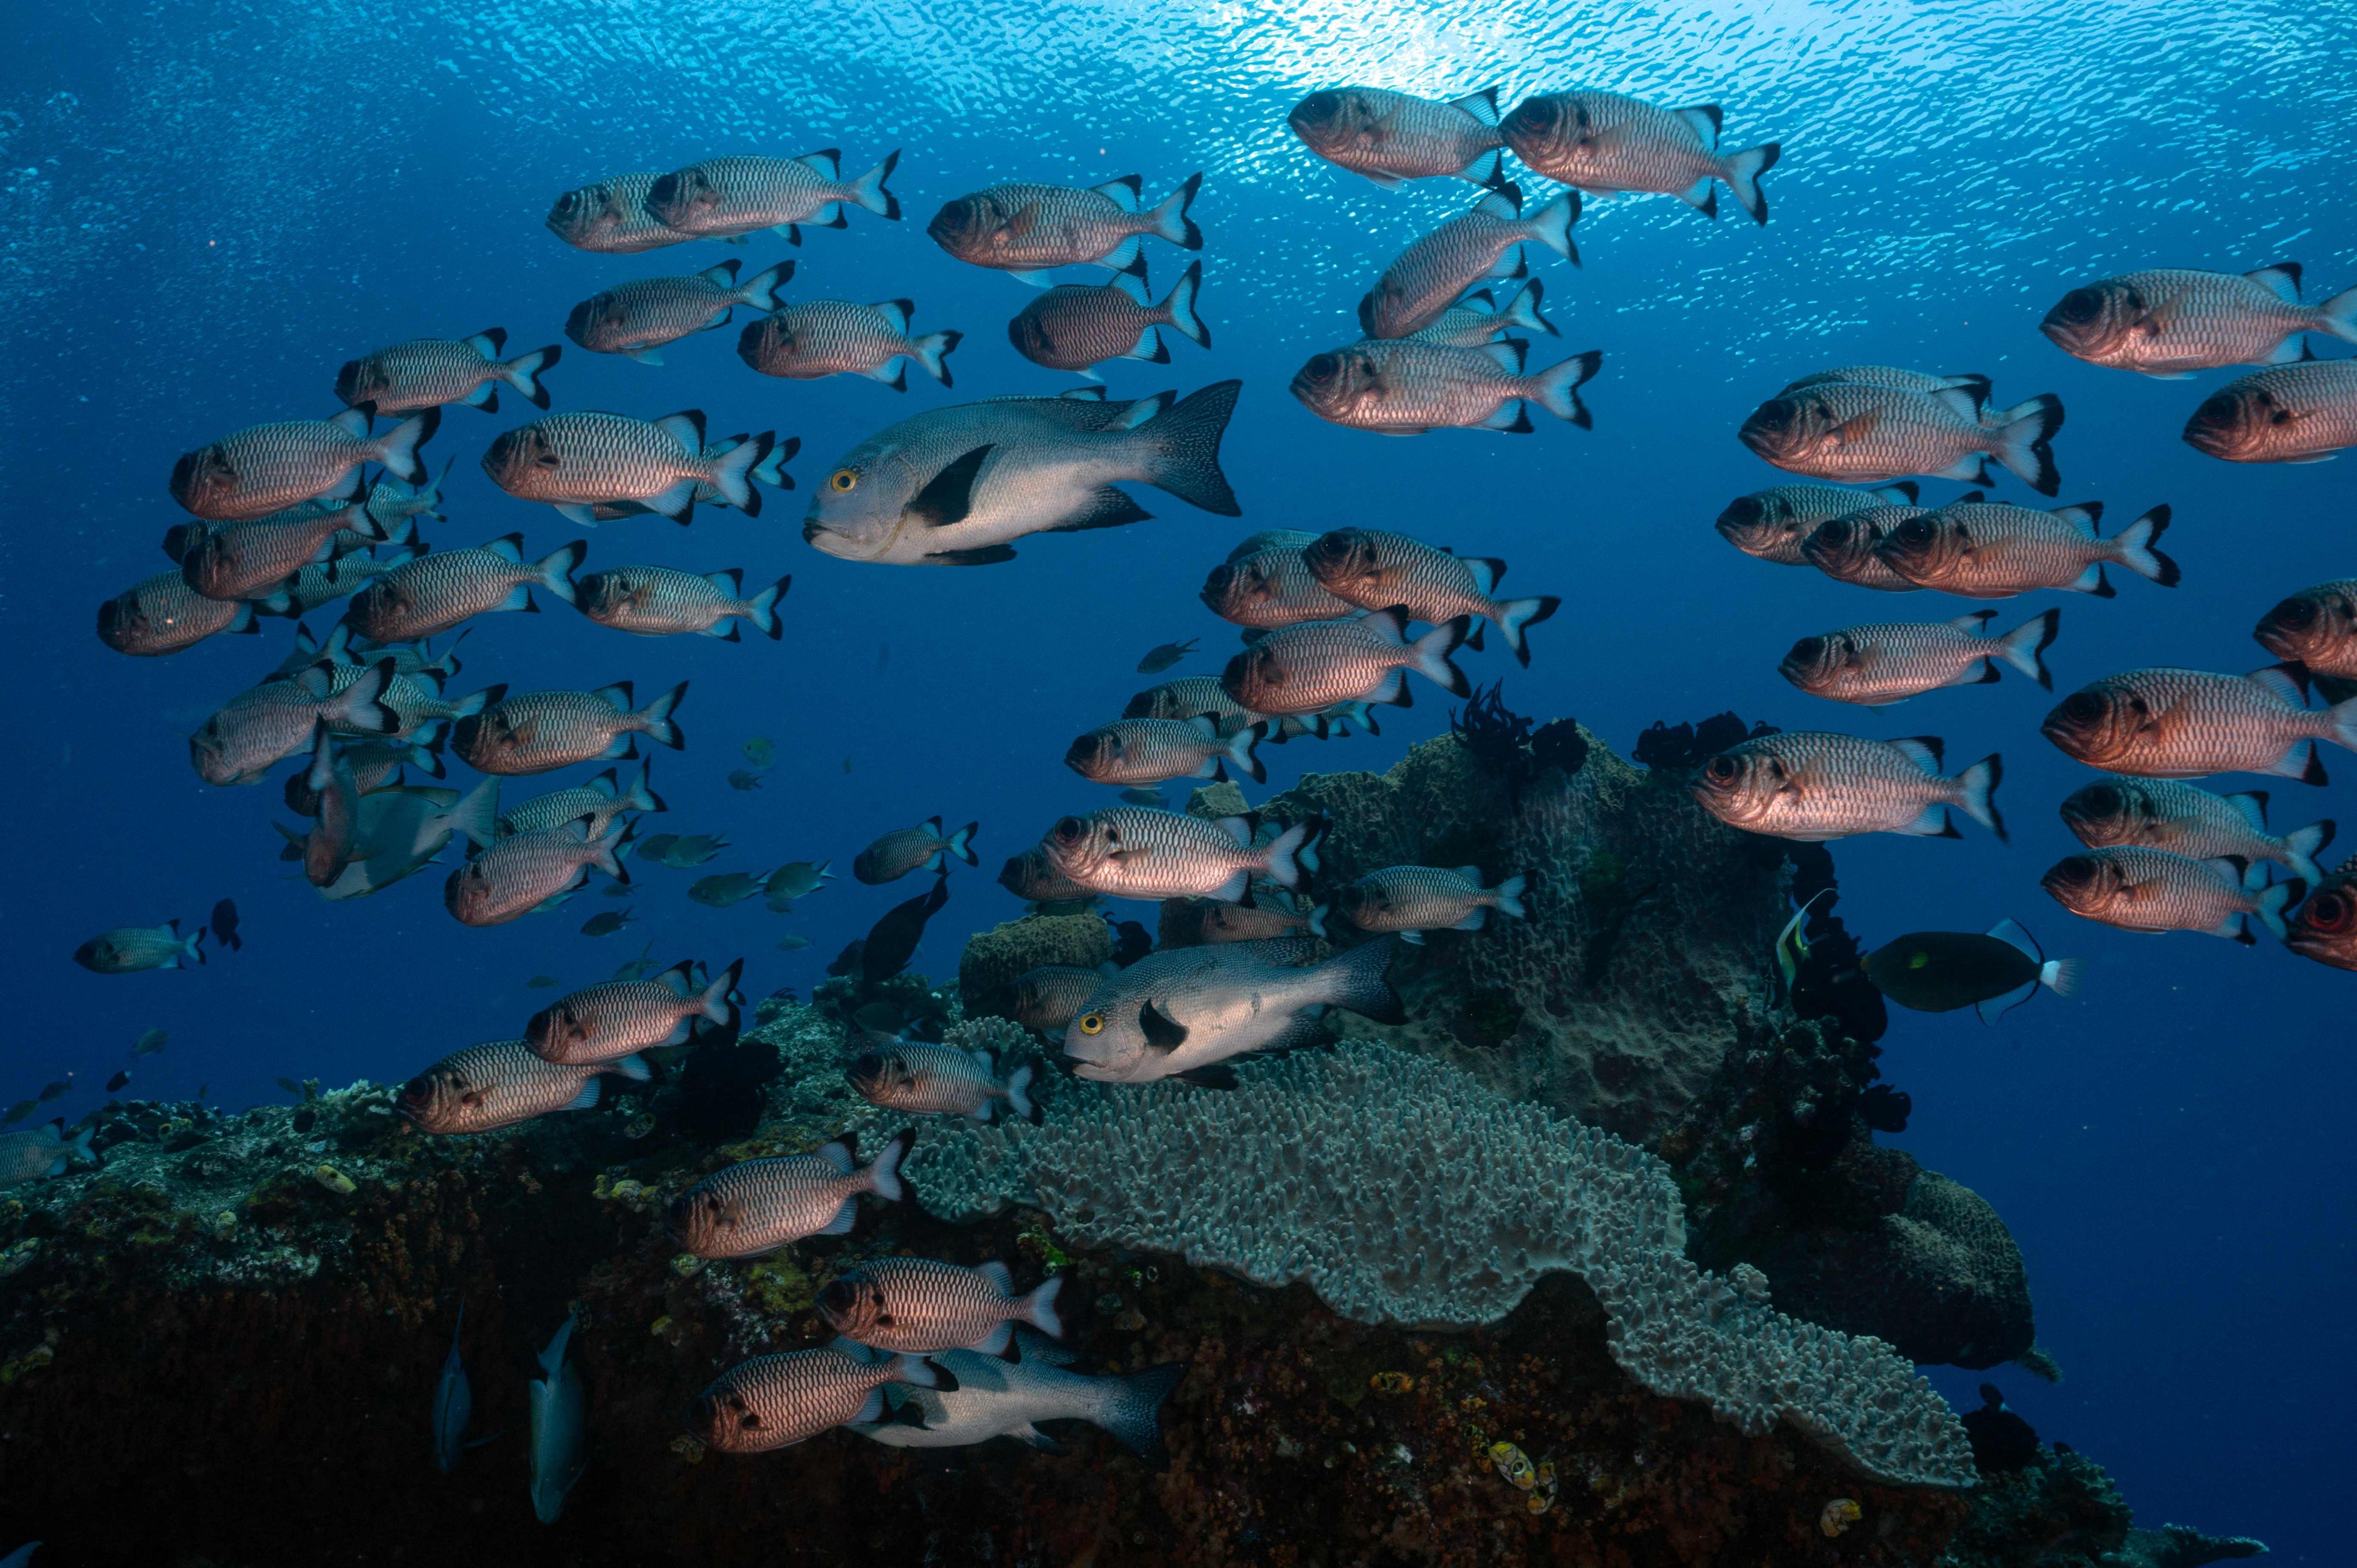 A school of fish swims in the waters of Raja Ampat Regency in Indonesia’s West Papua region. Photo: AFP